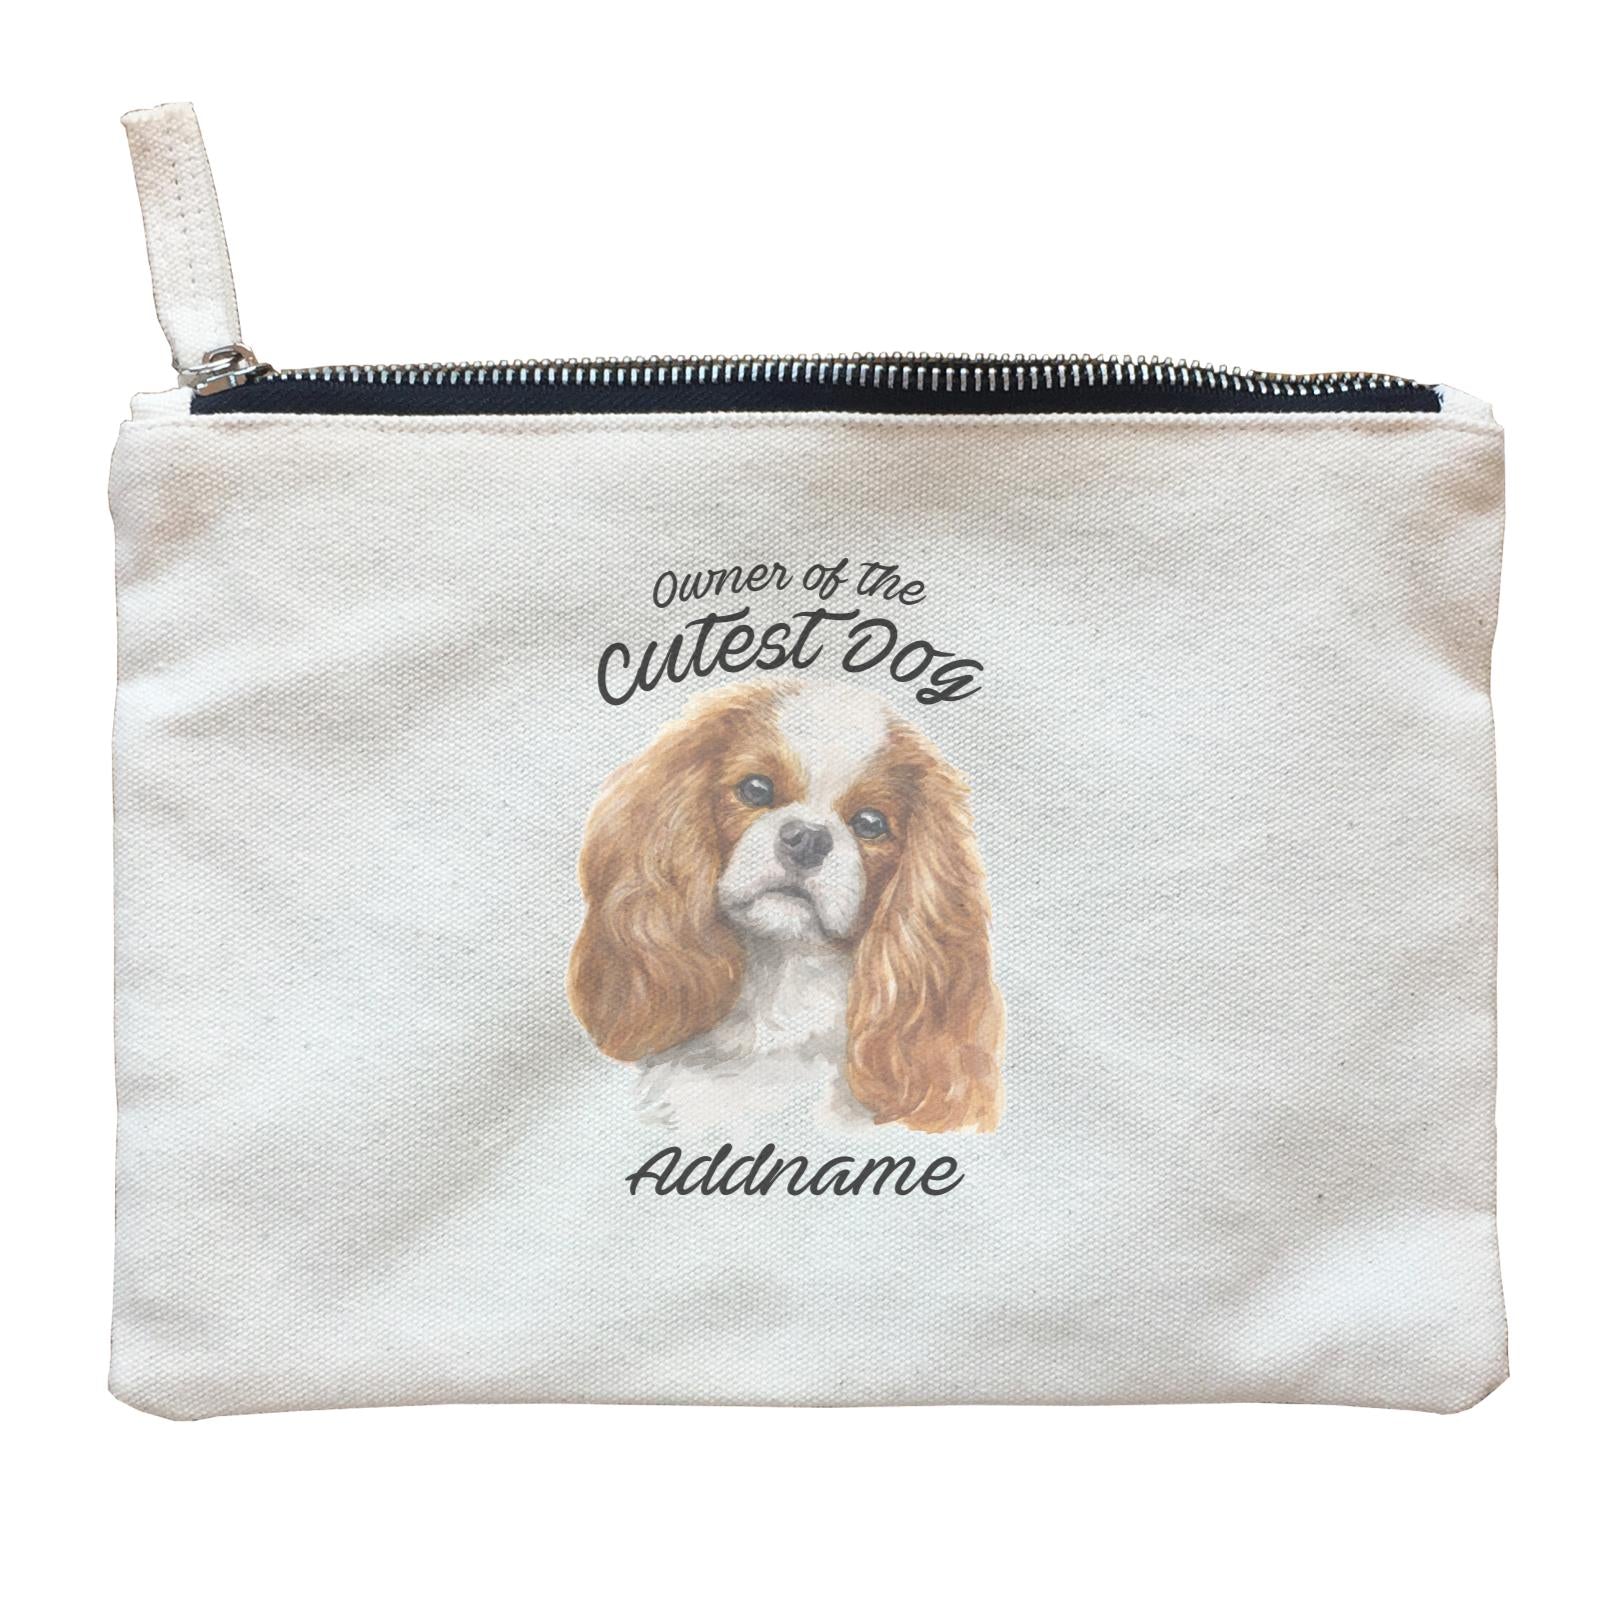 Watercolor Dog Owner Of The Cutest Dog King Charles Spaniel Curly Addname Zipper Pouch